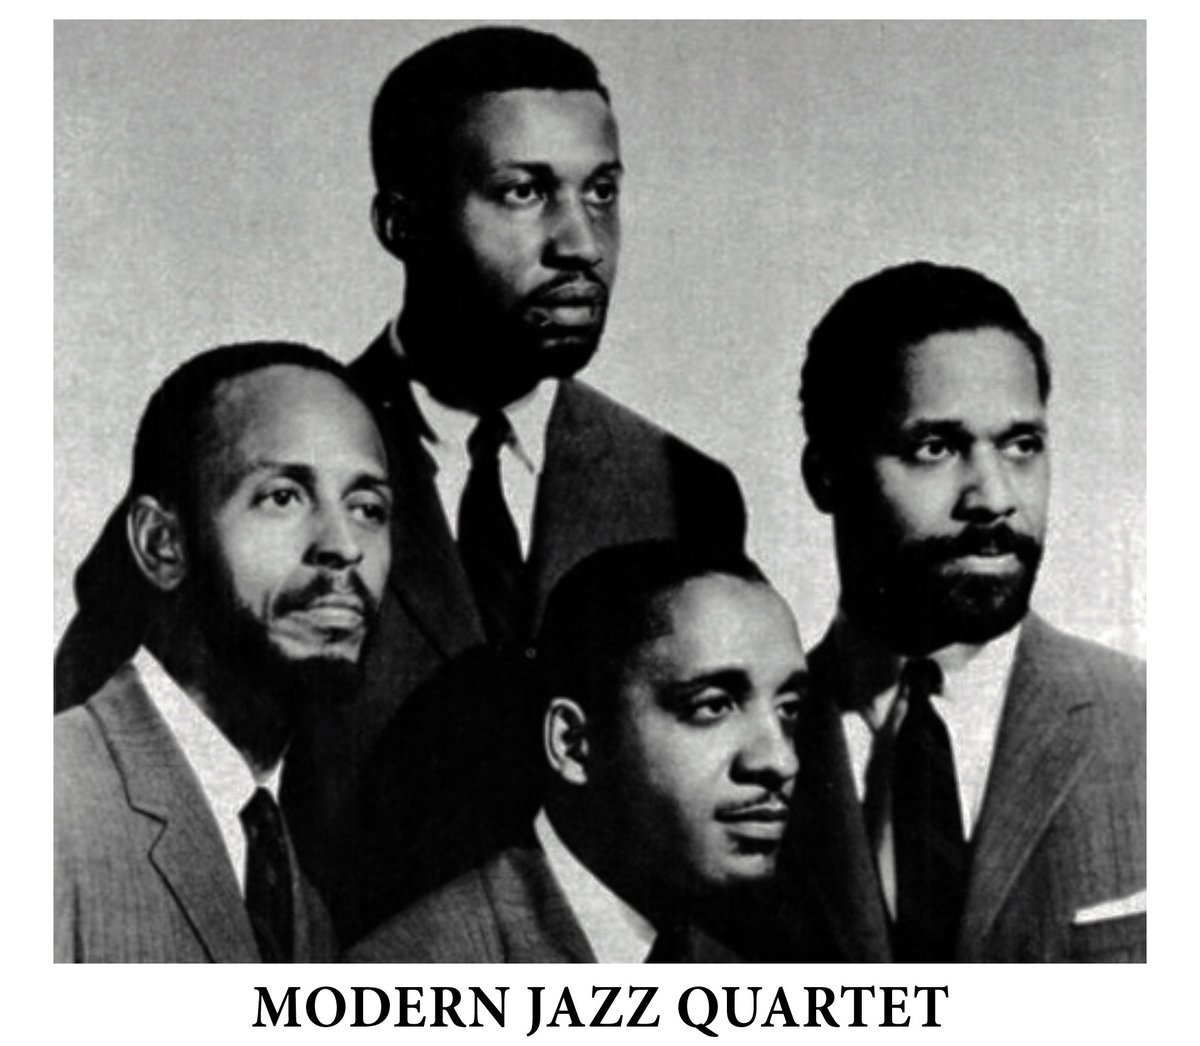 #ModernJazzQuartet was a jazz combo established in 1952 that played music influenced by classical, cool jazz, blues and bebop. #PercyHeath, #ConnieKay, #MiltJackson & #JohnLewis. #Vicshow85